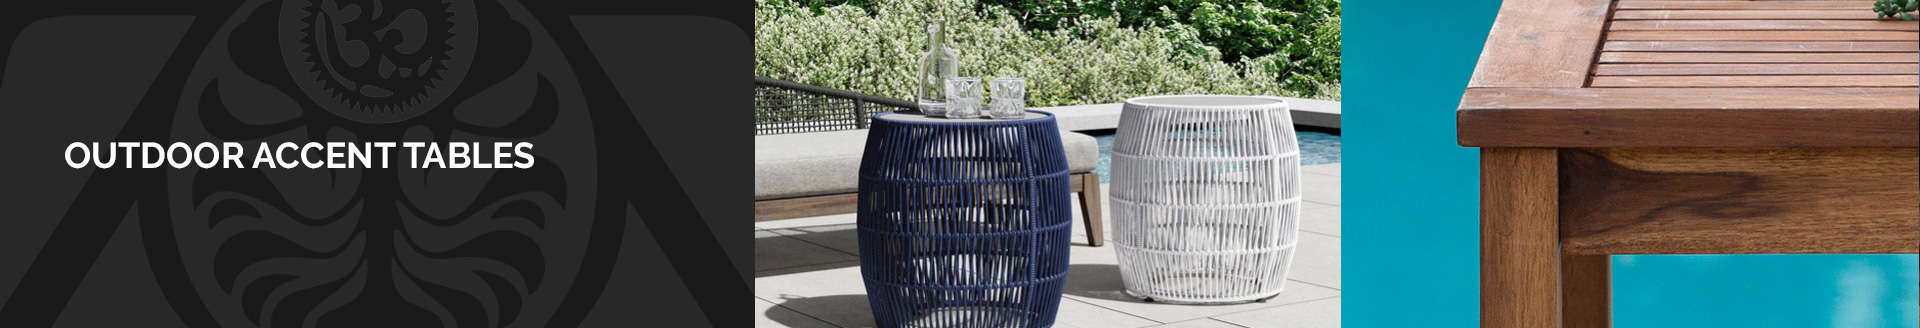 Outdoor accent tables manufacturers wholesale Bali Java Indonesia